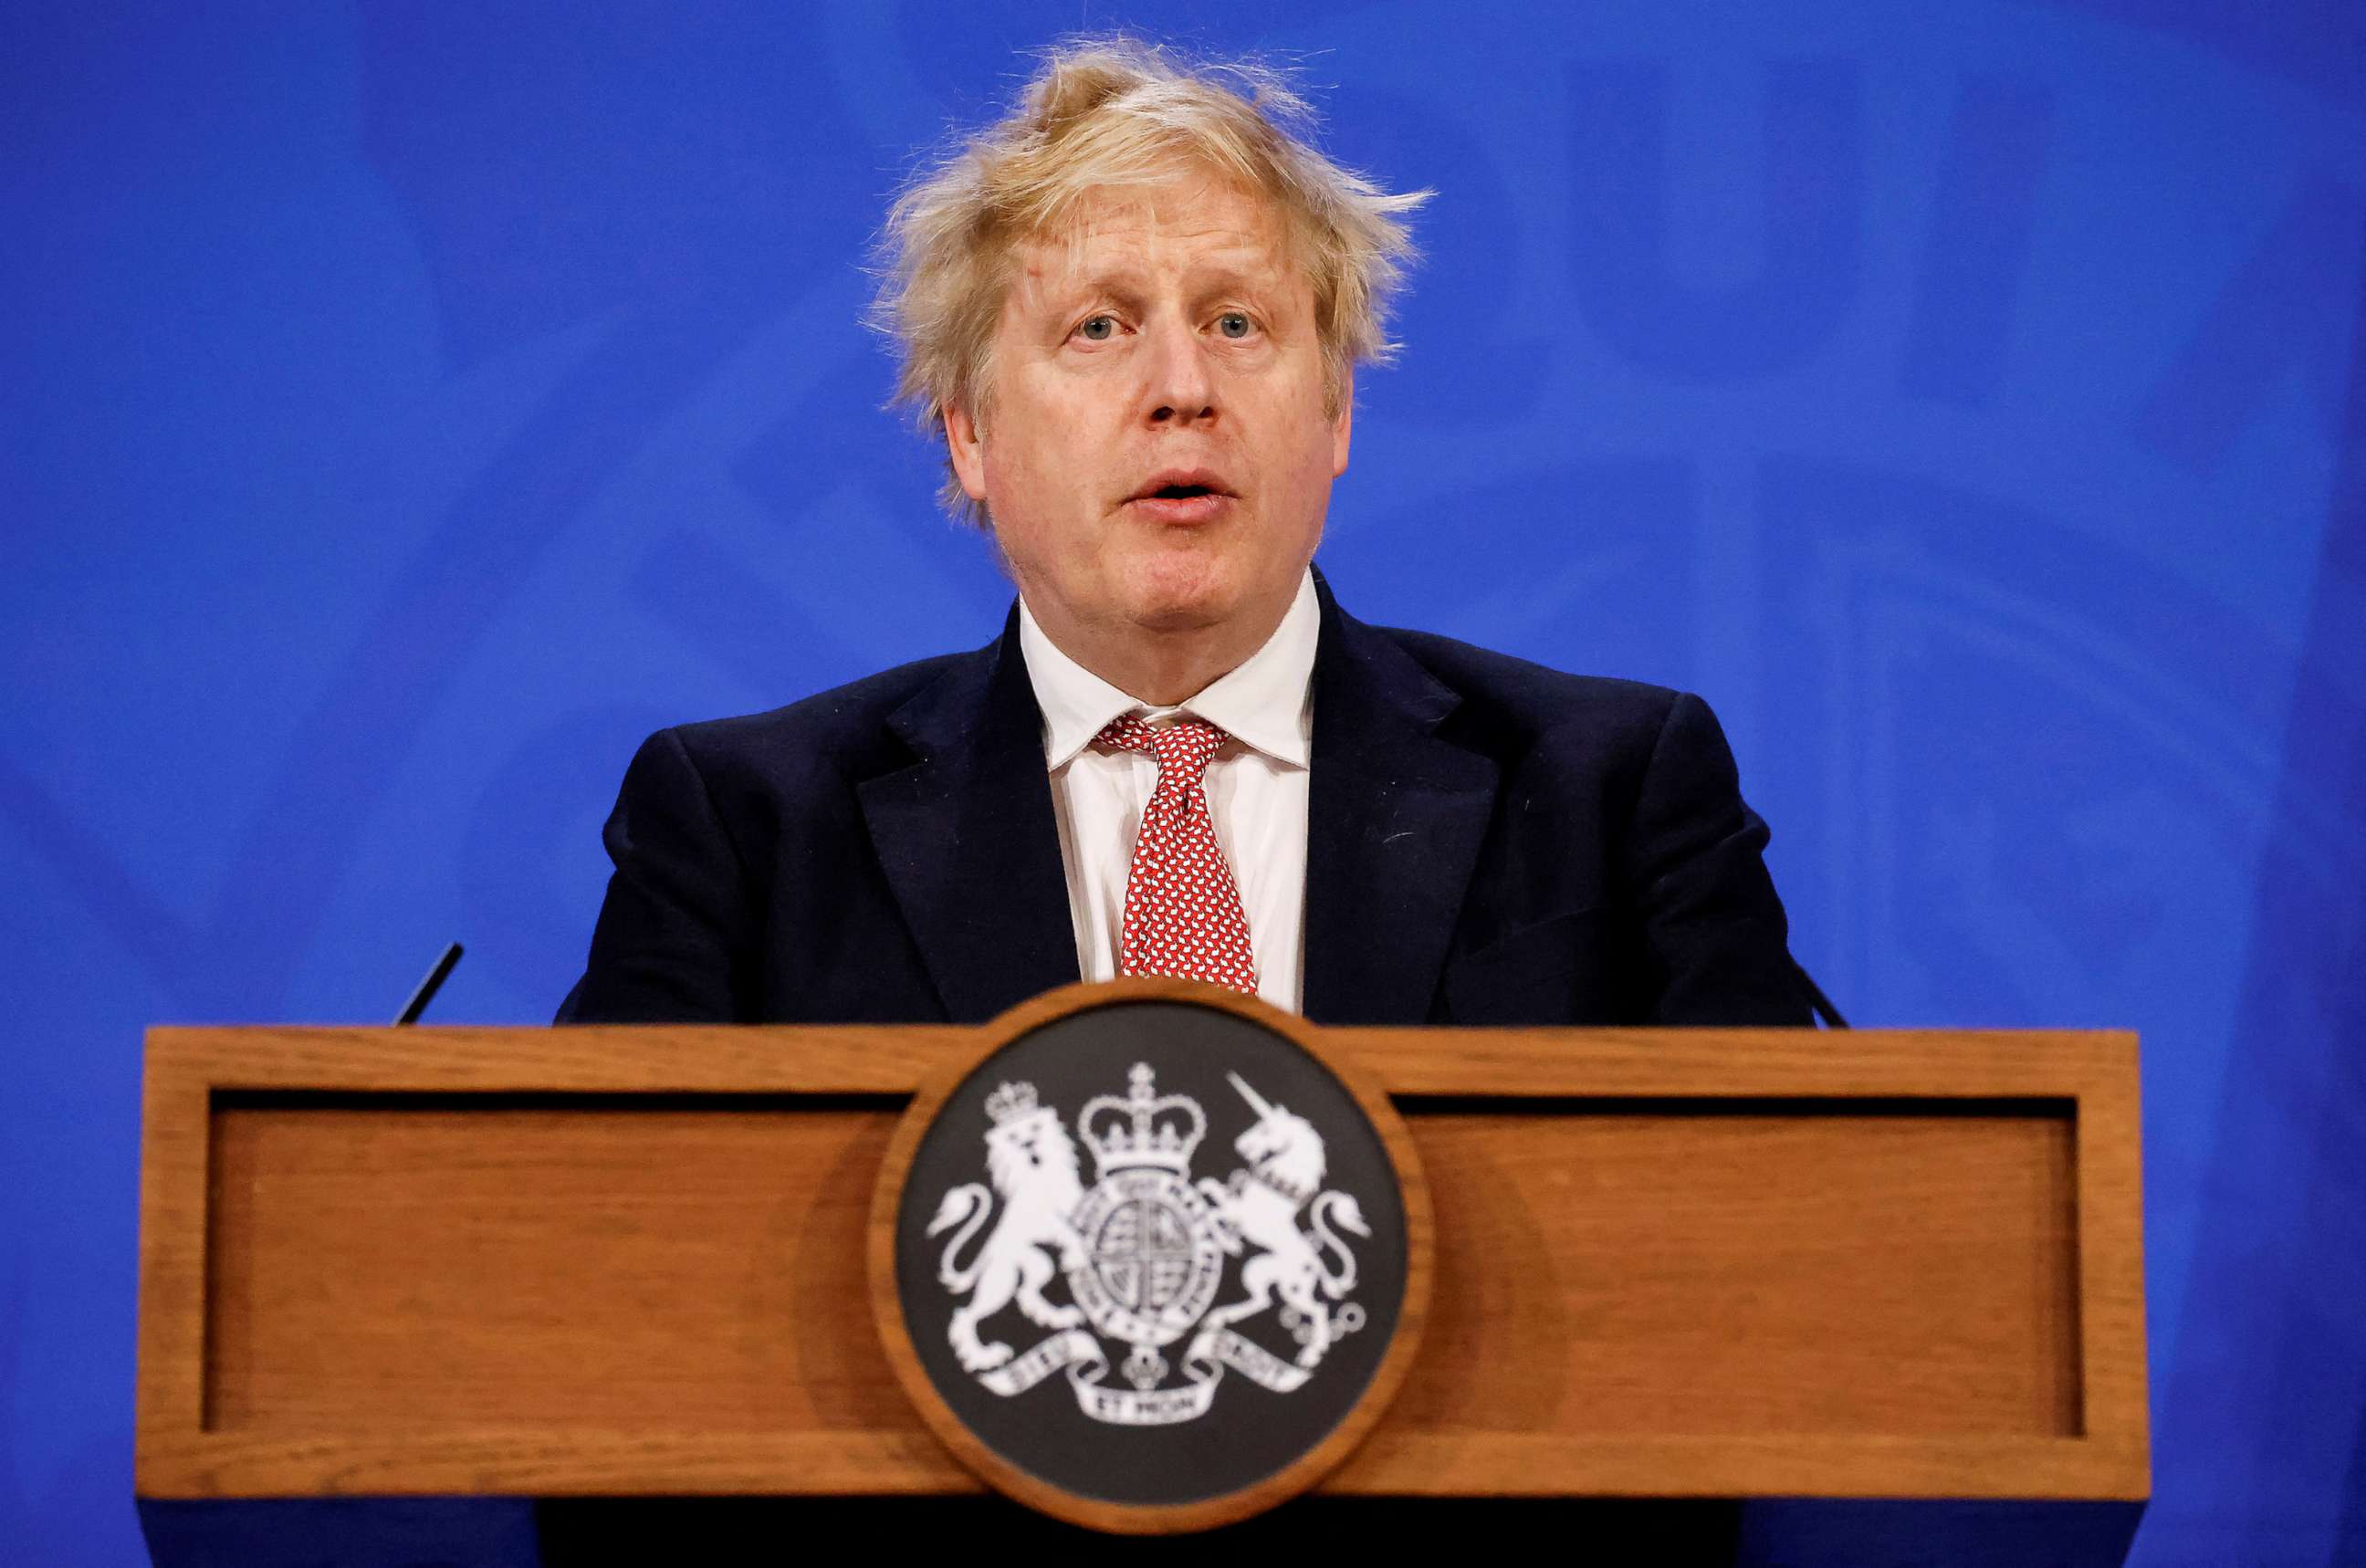 PHOTO: British Prime Minister Boris Johnson speaks during a news conference outlining the government's new long-term COVID-19 pandemic plan, at Downing Street in London, Feb. 21, 2022.